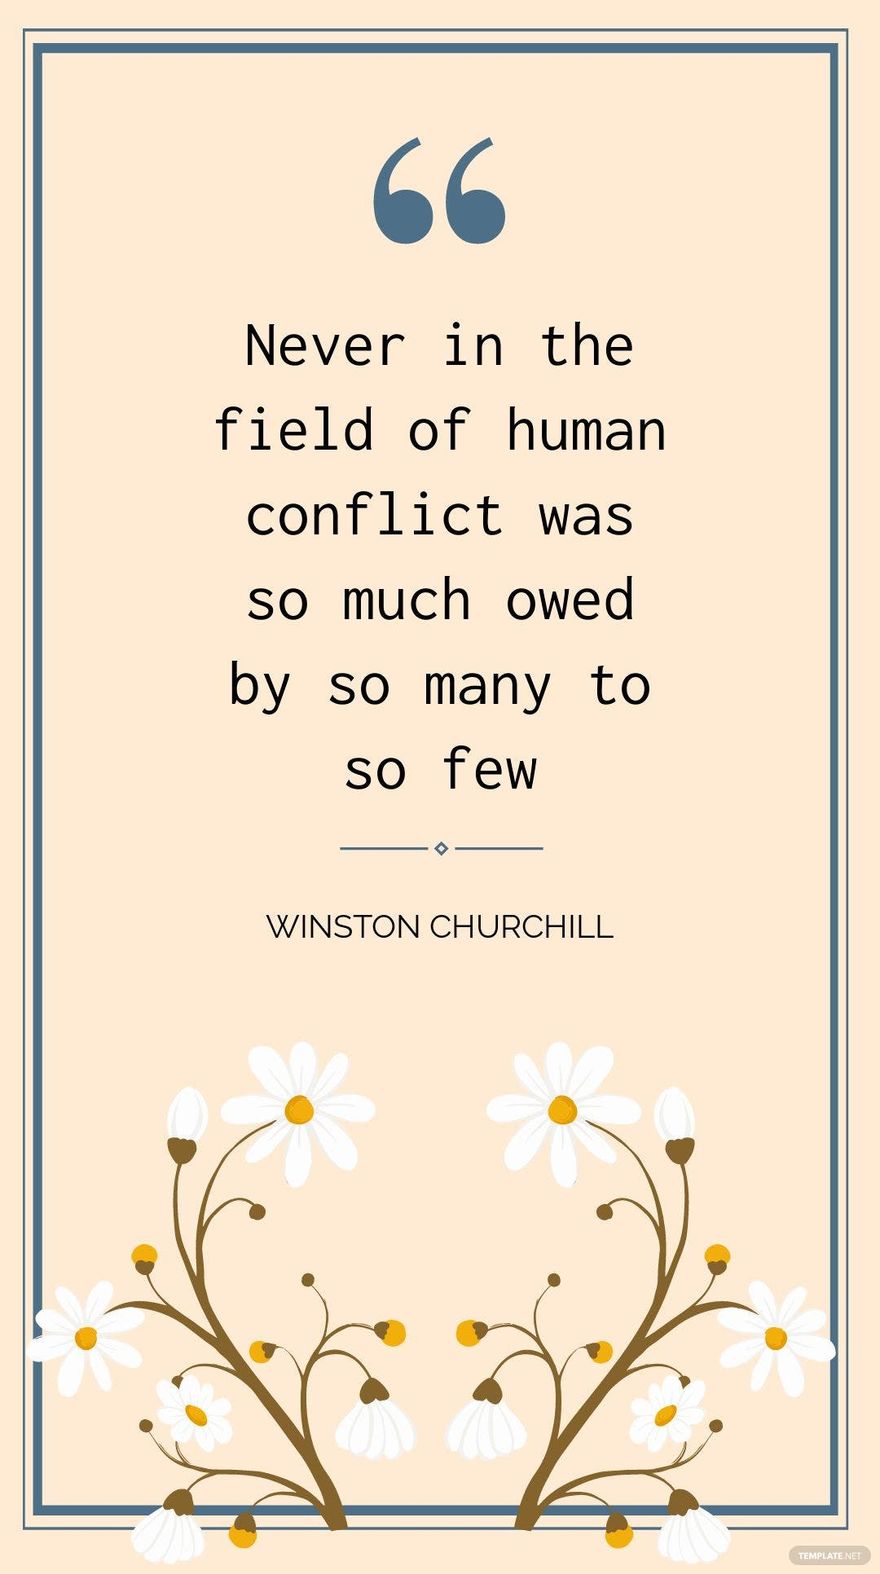 Free Winston Churchill - Never in the field of human conflict was so much owed by so many to so few 